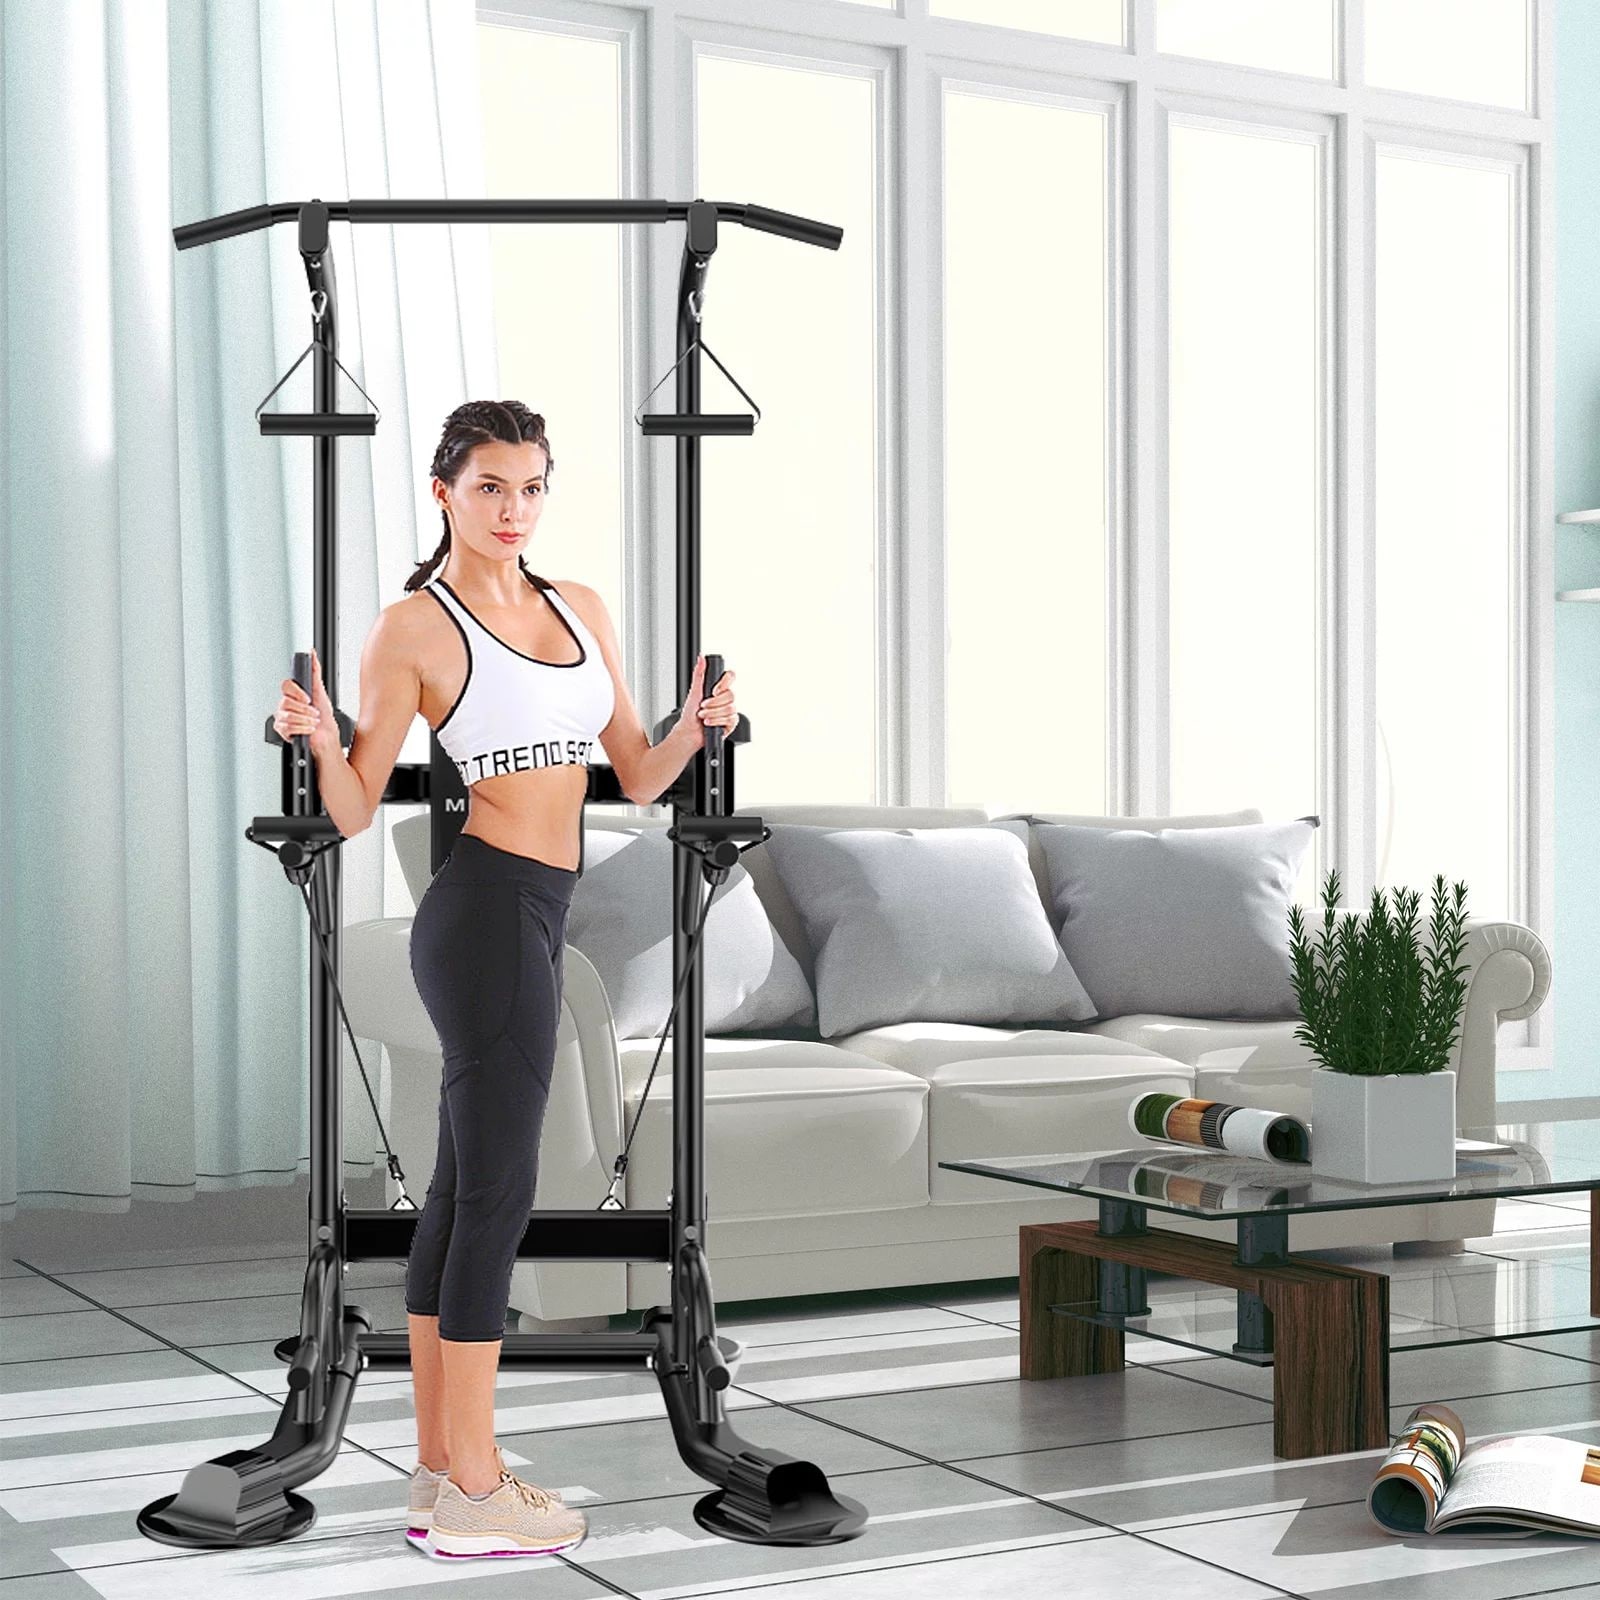 Red Exercise Equipment - Bed Bath & Beyond